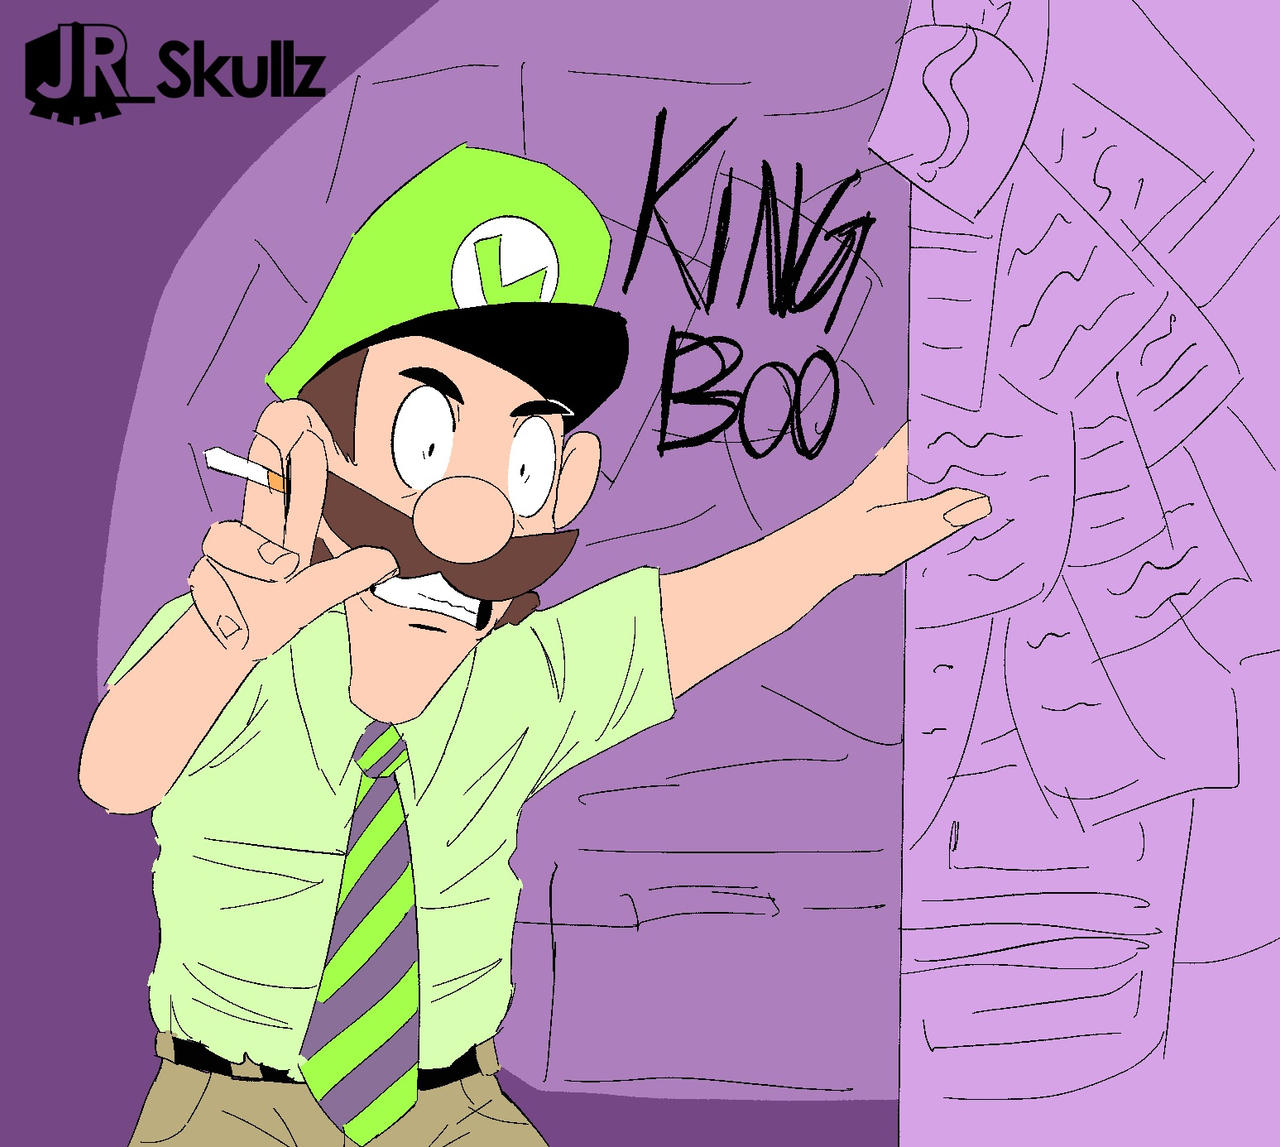 Bran (Open Comms) on X: Charlie Day Luigi will be real in the